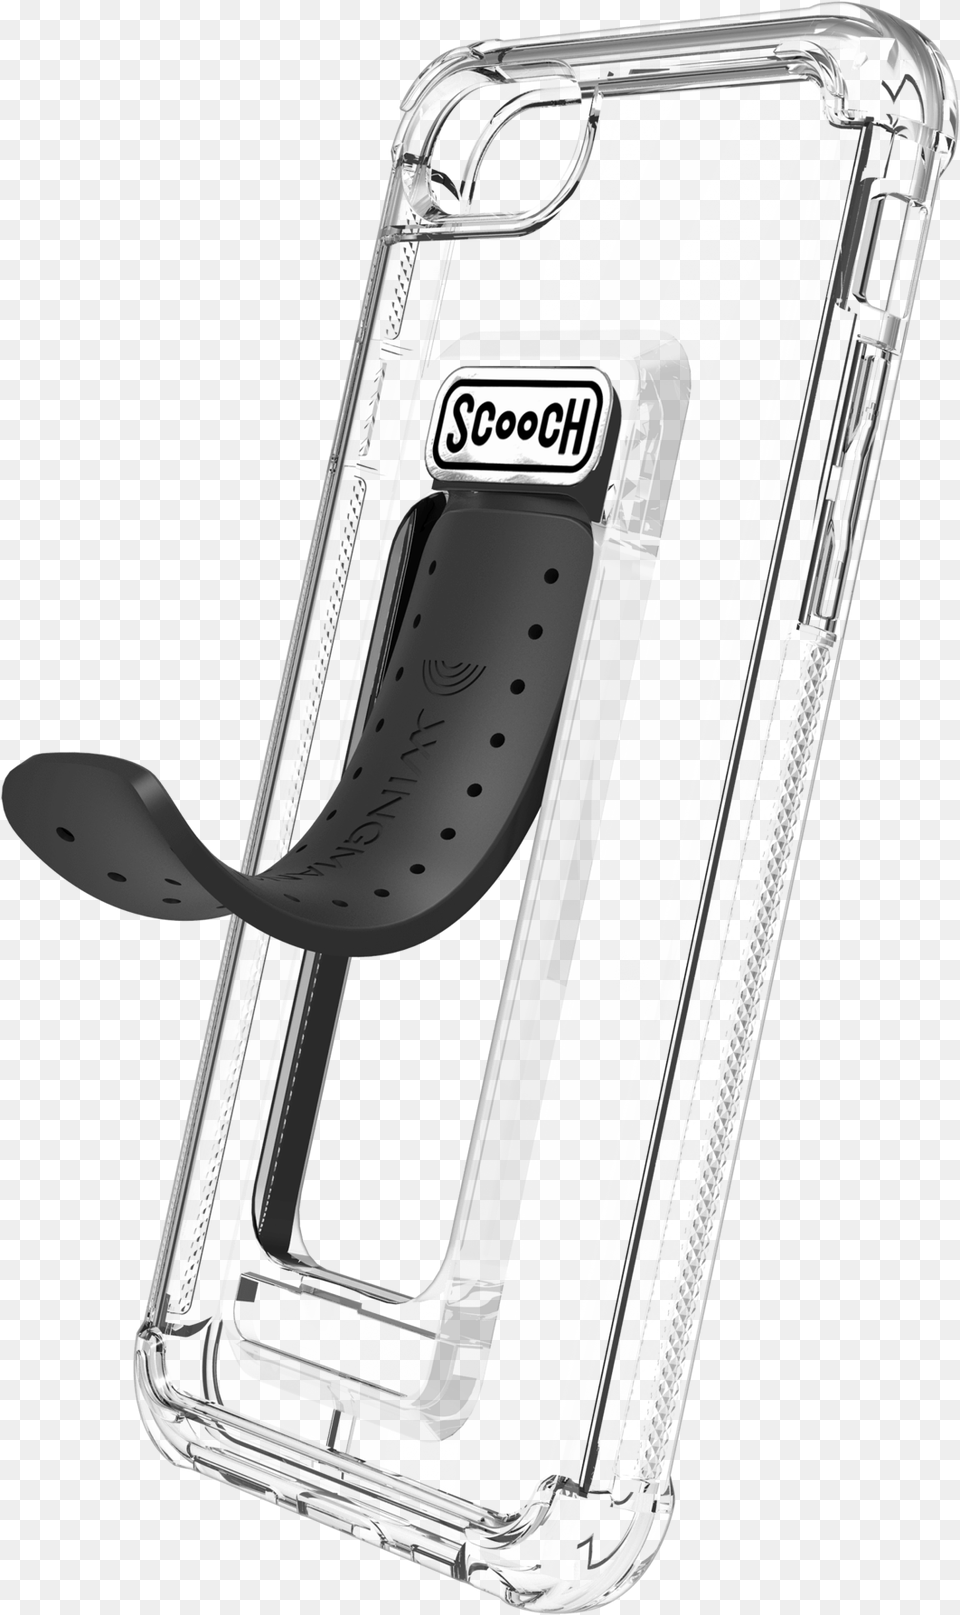 Scooch Case Wingman Wingman Iphone 66sclass Lazyload Scooch Iphone 8 Case, Electronics, Phone, Smoke Pipe, Cutlery Free Transparent Png